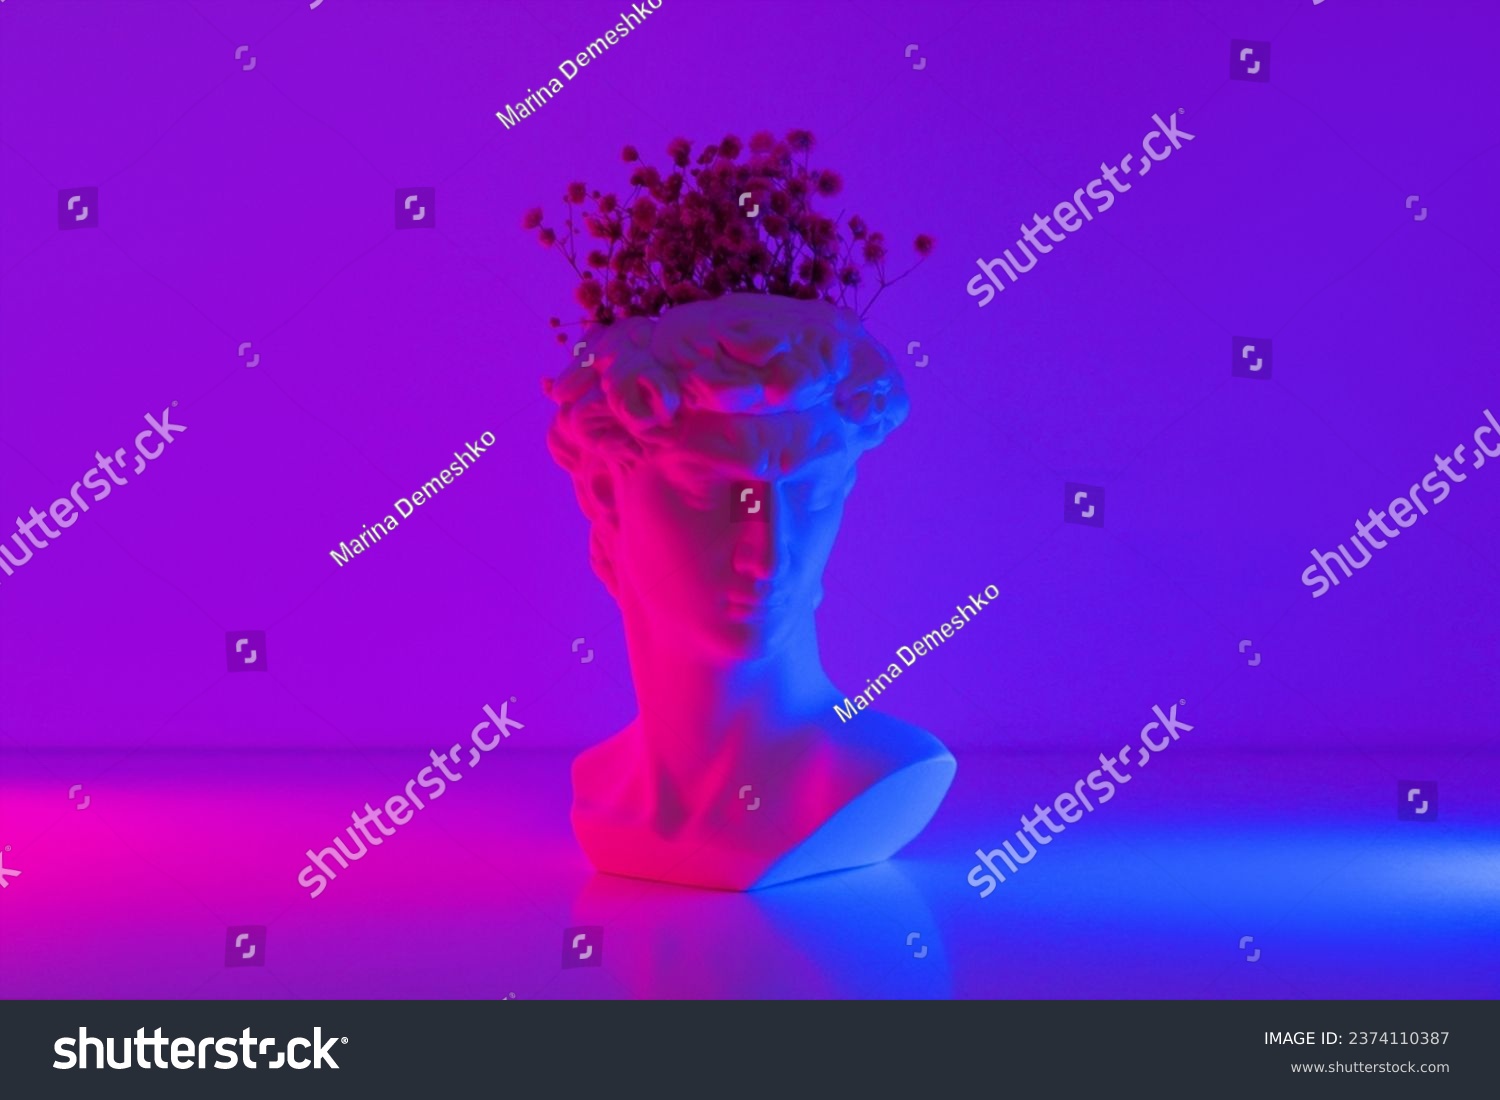 Plaster antique David's statue head with flowers inside pink and blue colored neon light. 3d trendy collage in magazine style. Contemporary art. Modern creative design #2374110387